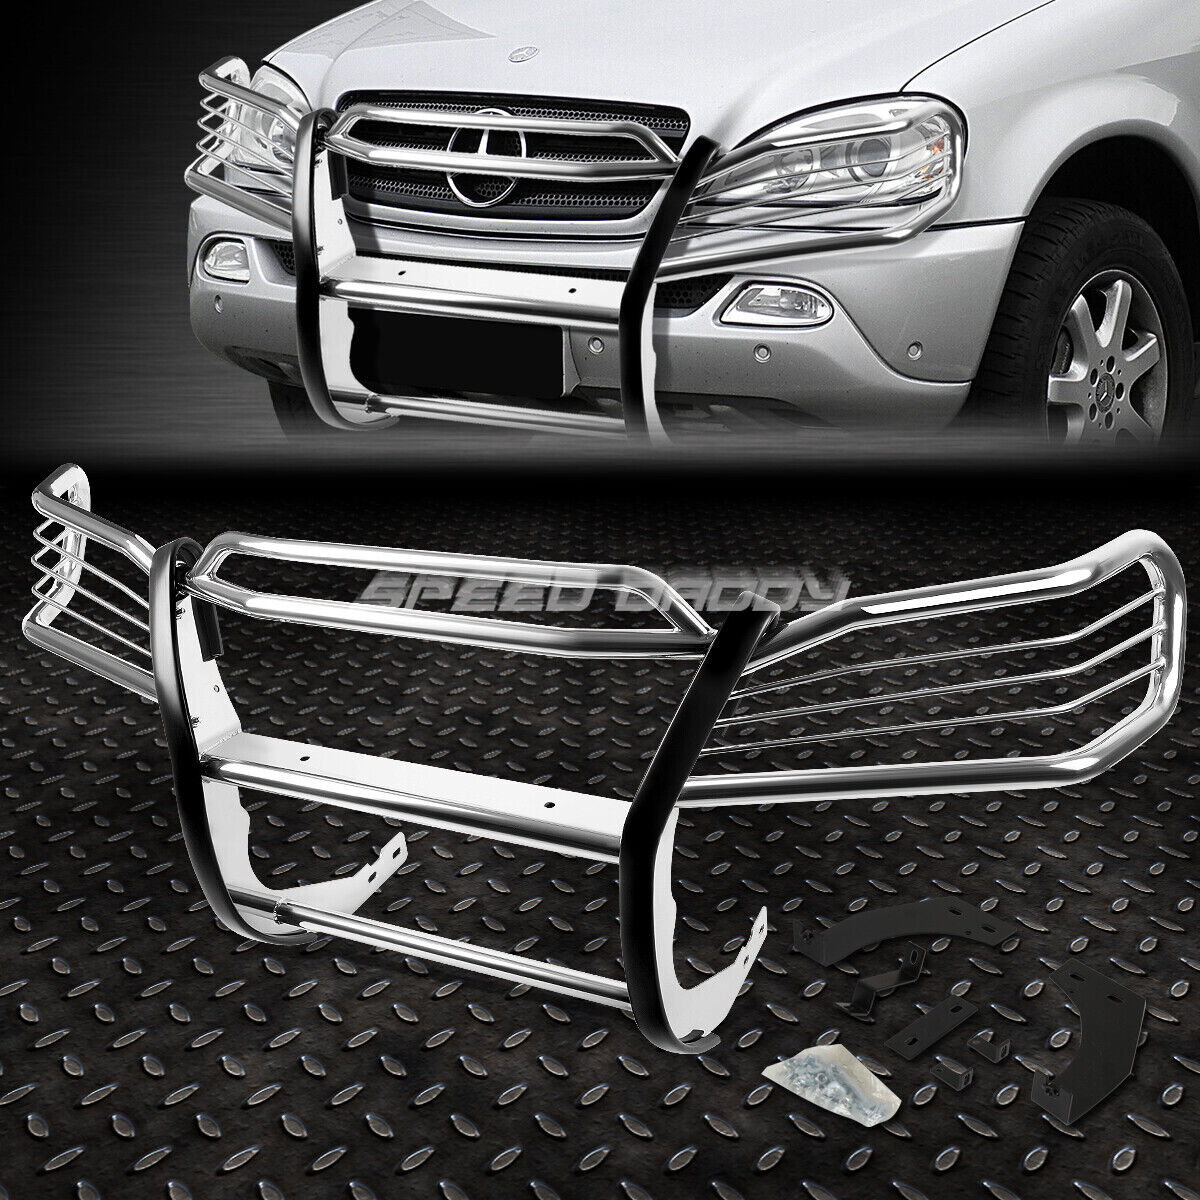 FOR 98-05 MERCEDES ML-CLASS W163 CHROME STAINLESS STEEL FRONT BUMPER GRILL GUARD